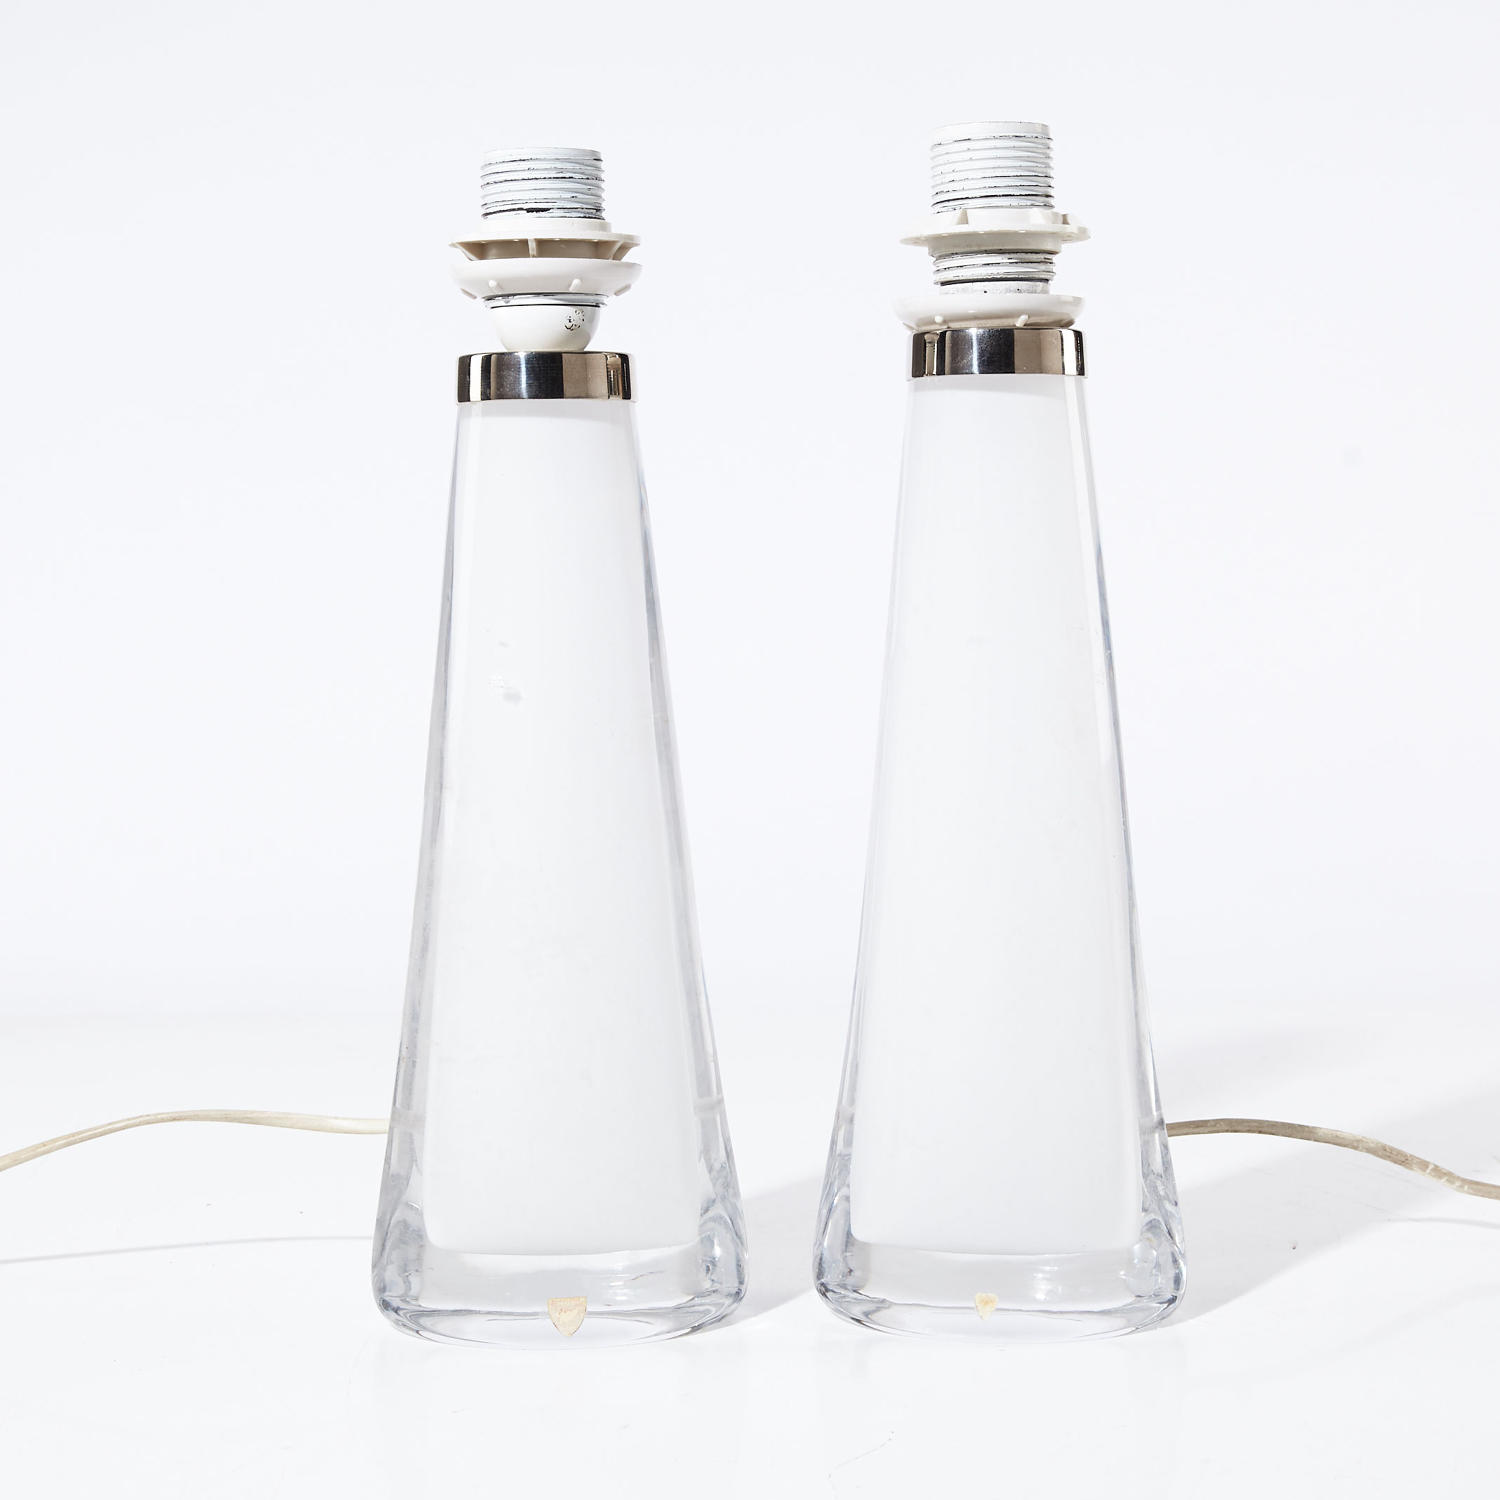 A pair of Orrefors glass table lamps